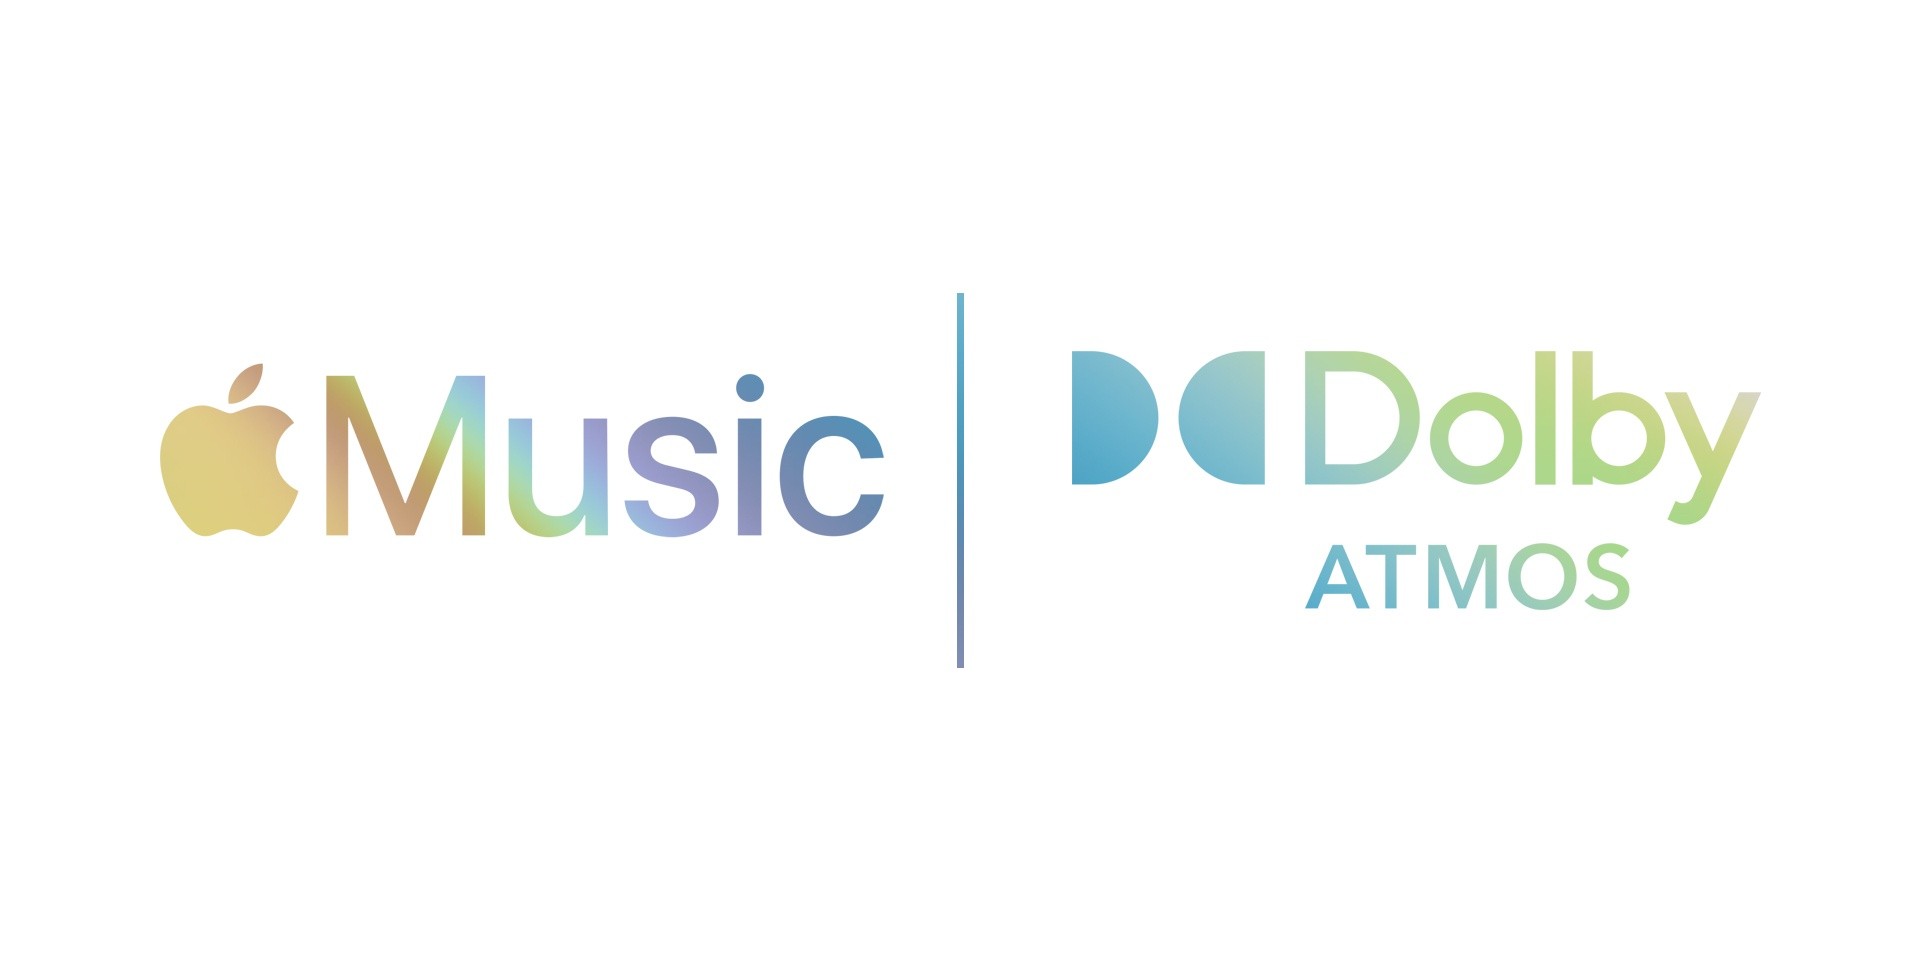 Apple Music is bringing the next generation of sound through Spatial Audio with Dolby Atmos for free